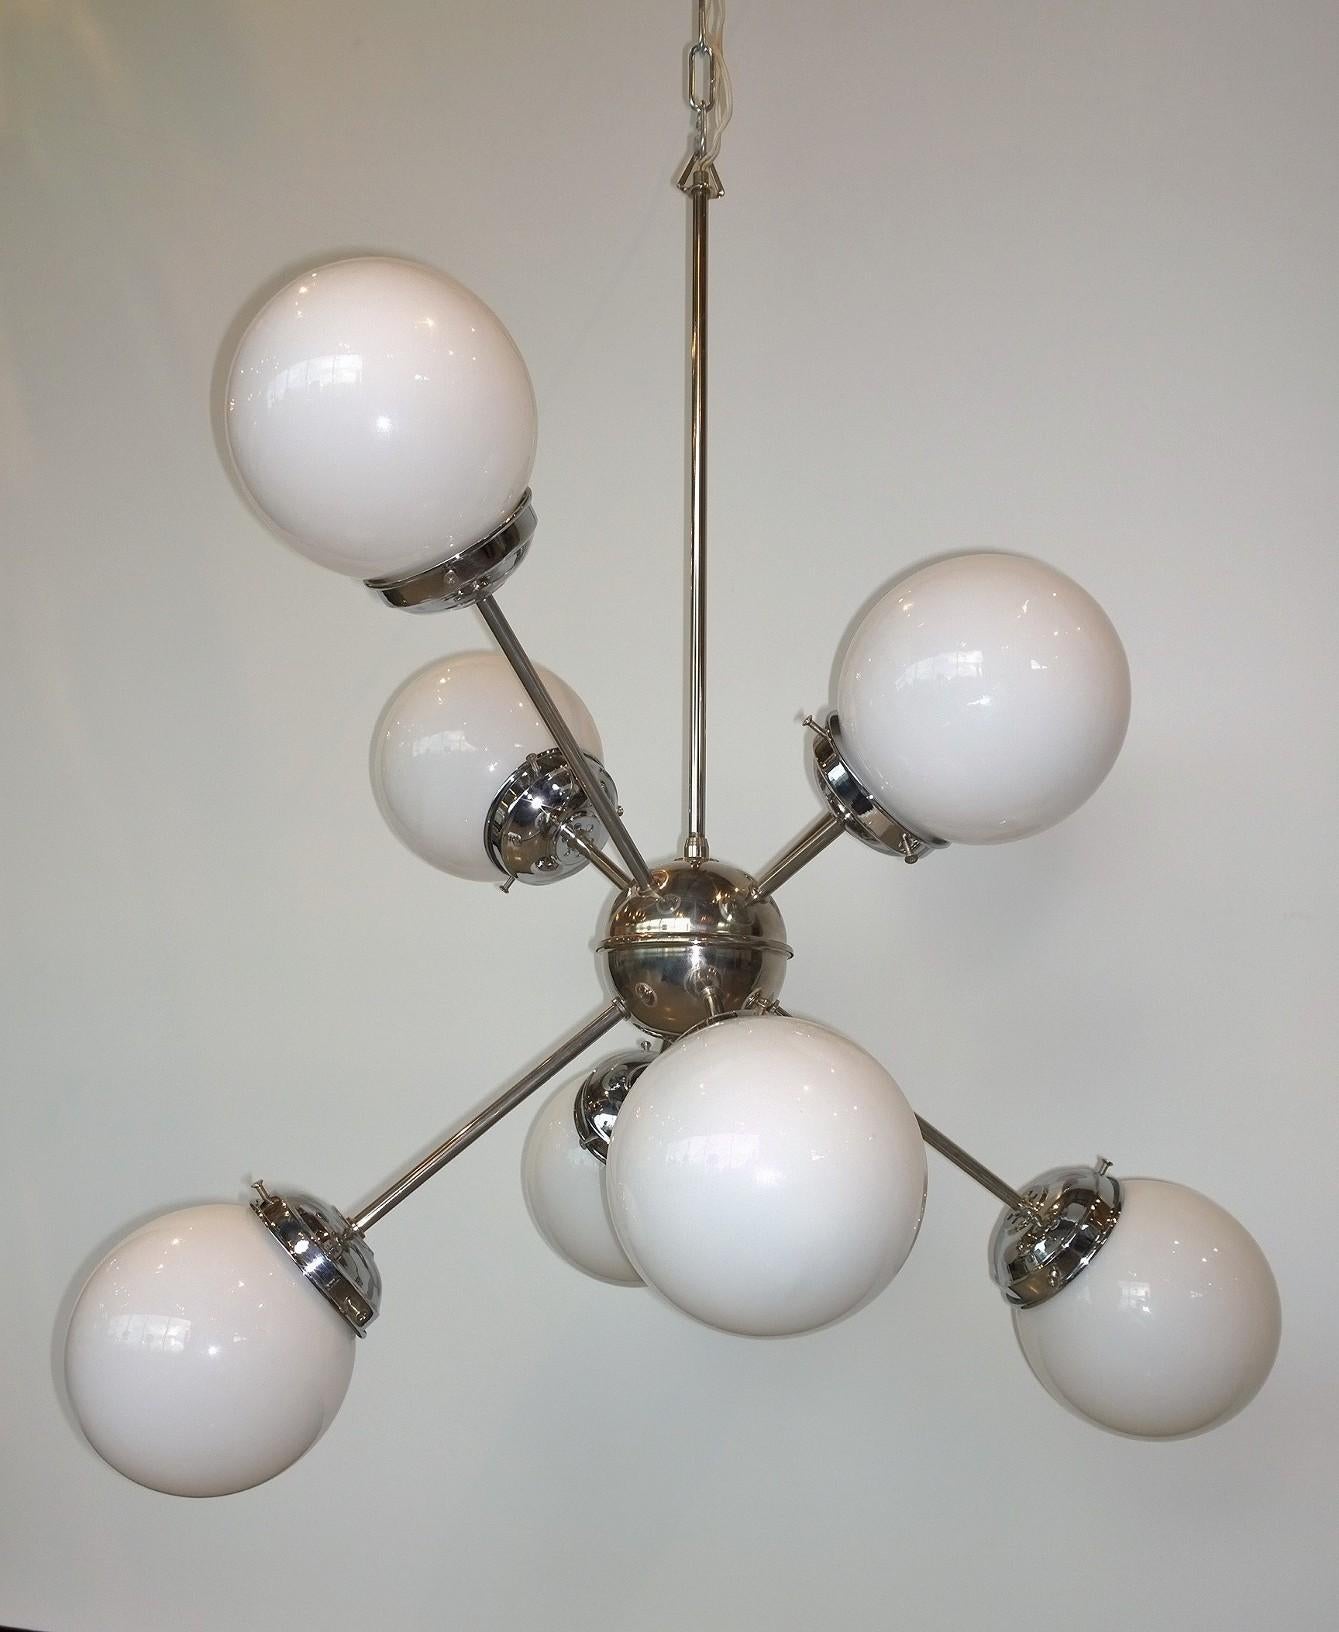 Offered is a Mid-Century Modern Italian Gaetano Sciolari eight-arm and torchère with large white globes and chrome plate 